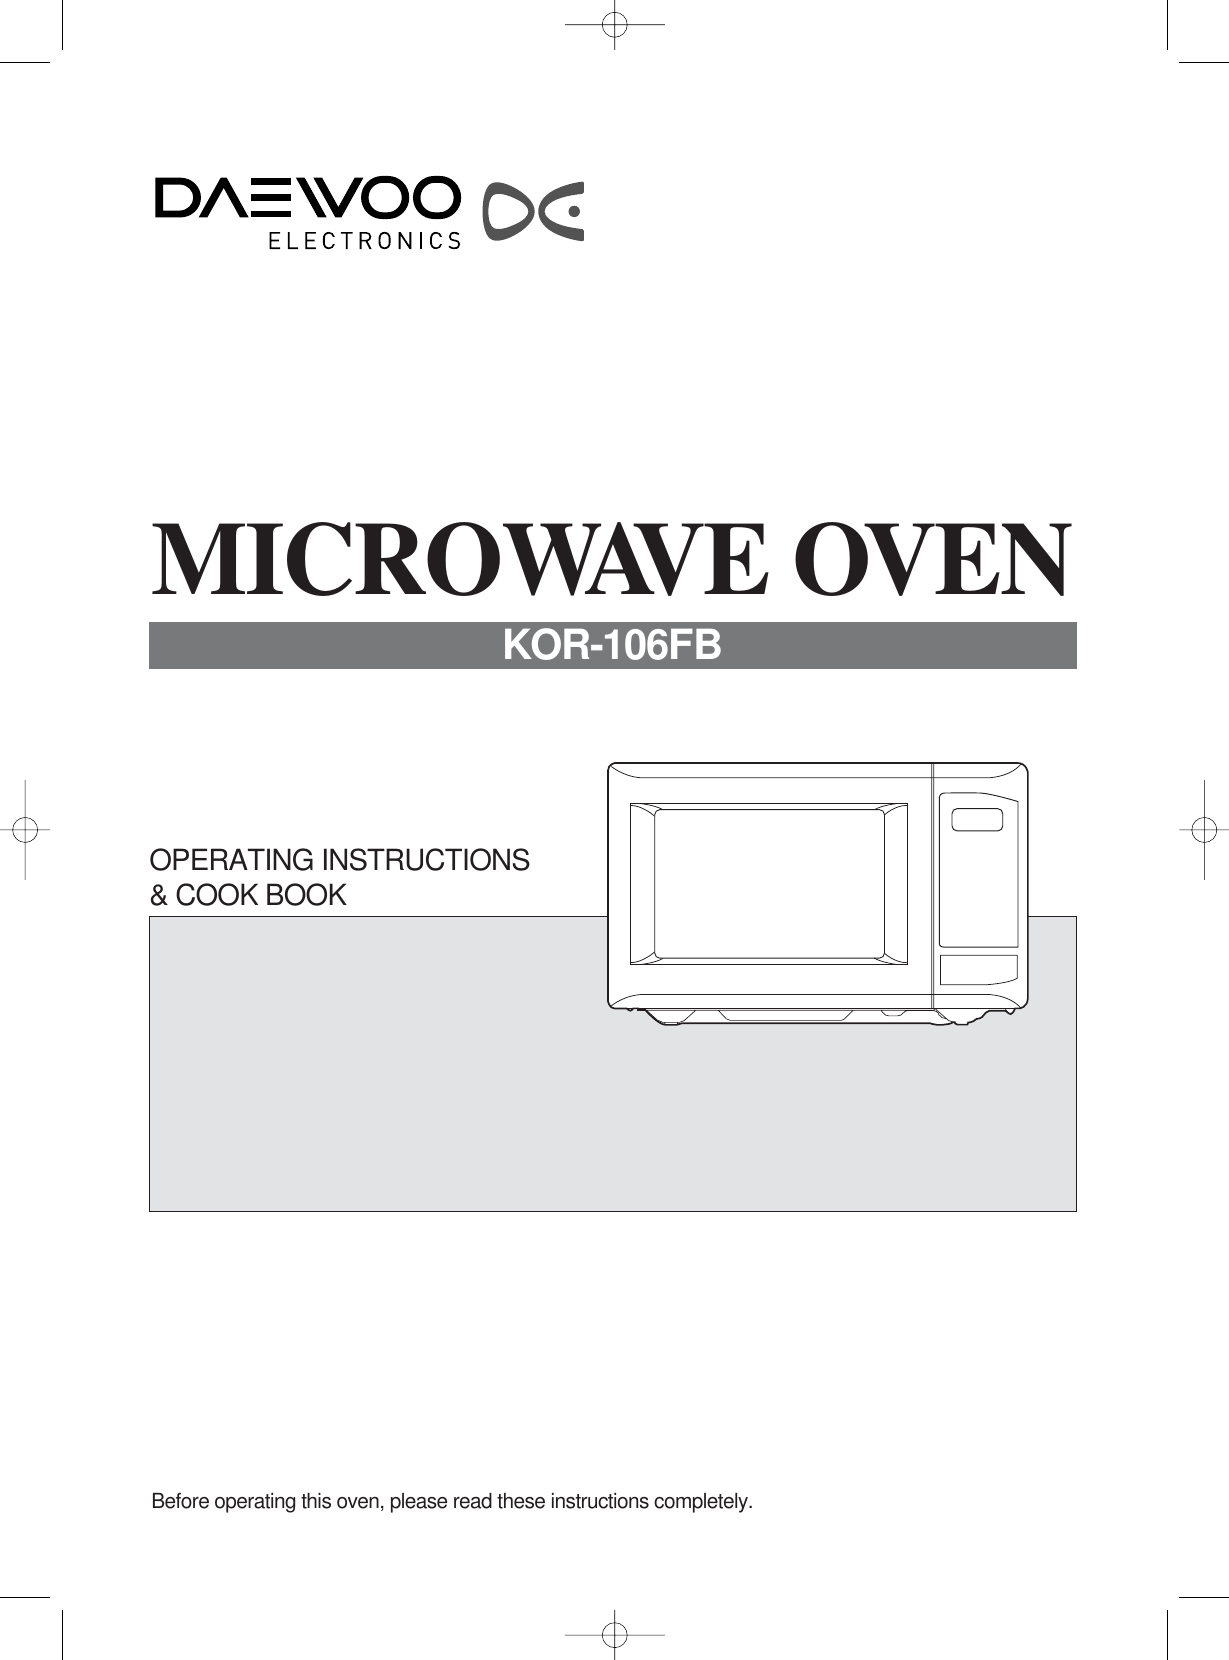 Before operating this oven, please read these instructions completely.OPERATING INSTRUCTIONS &amp; COOK BOOKMICROWAVE OVENKOR-106FB